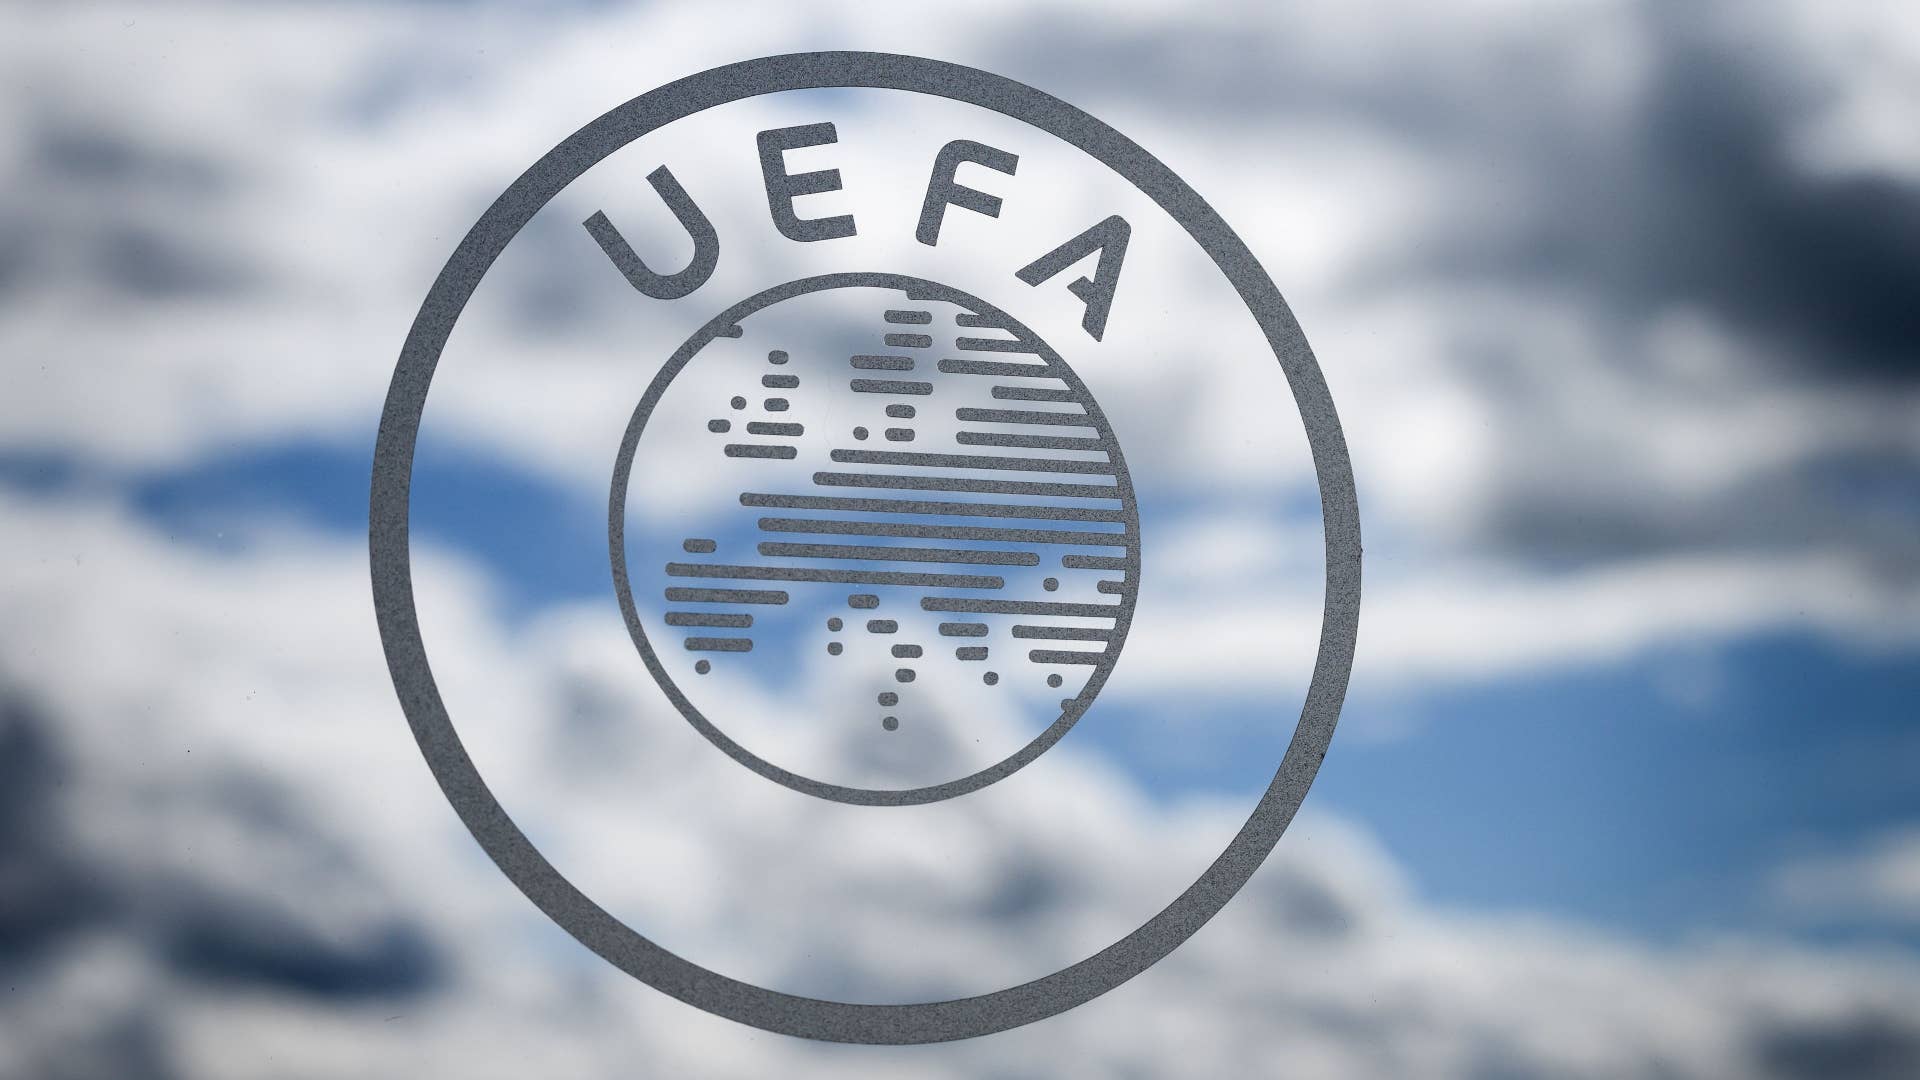 The UEFA logo is seen during the draw for the semi-finals round of the UEFA Champions League.